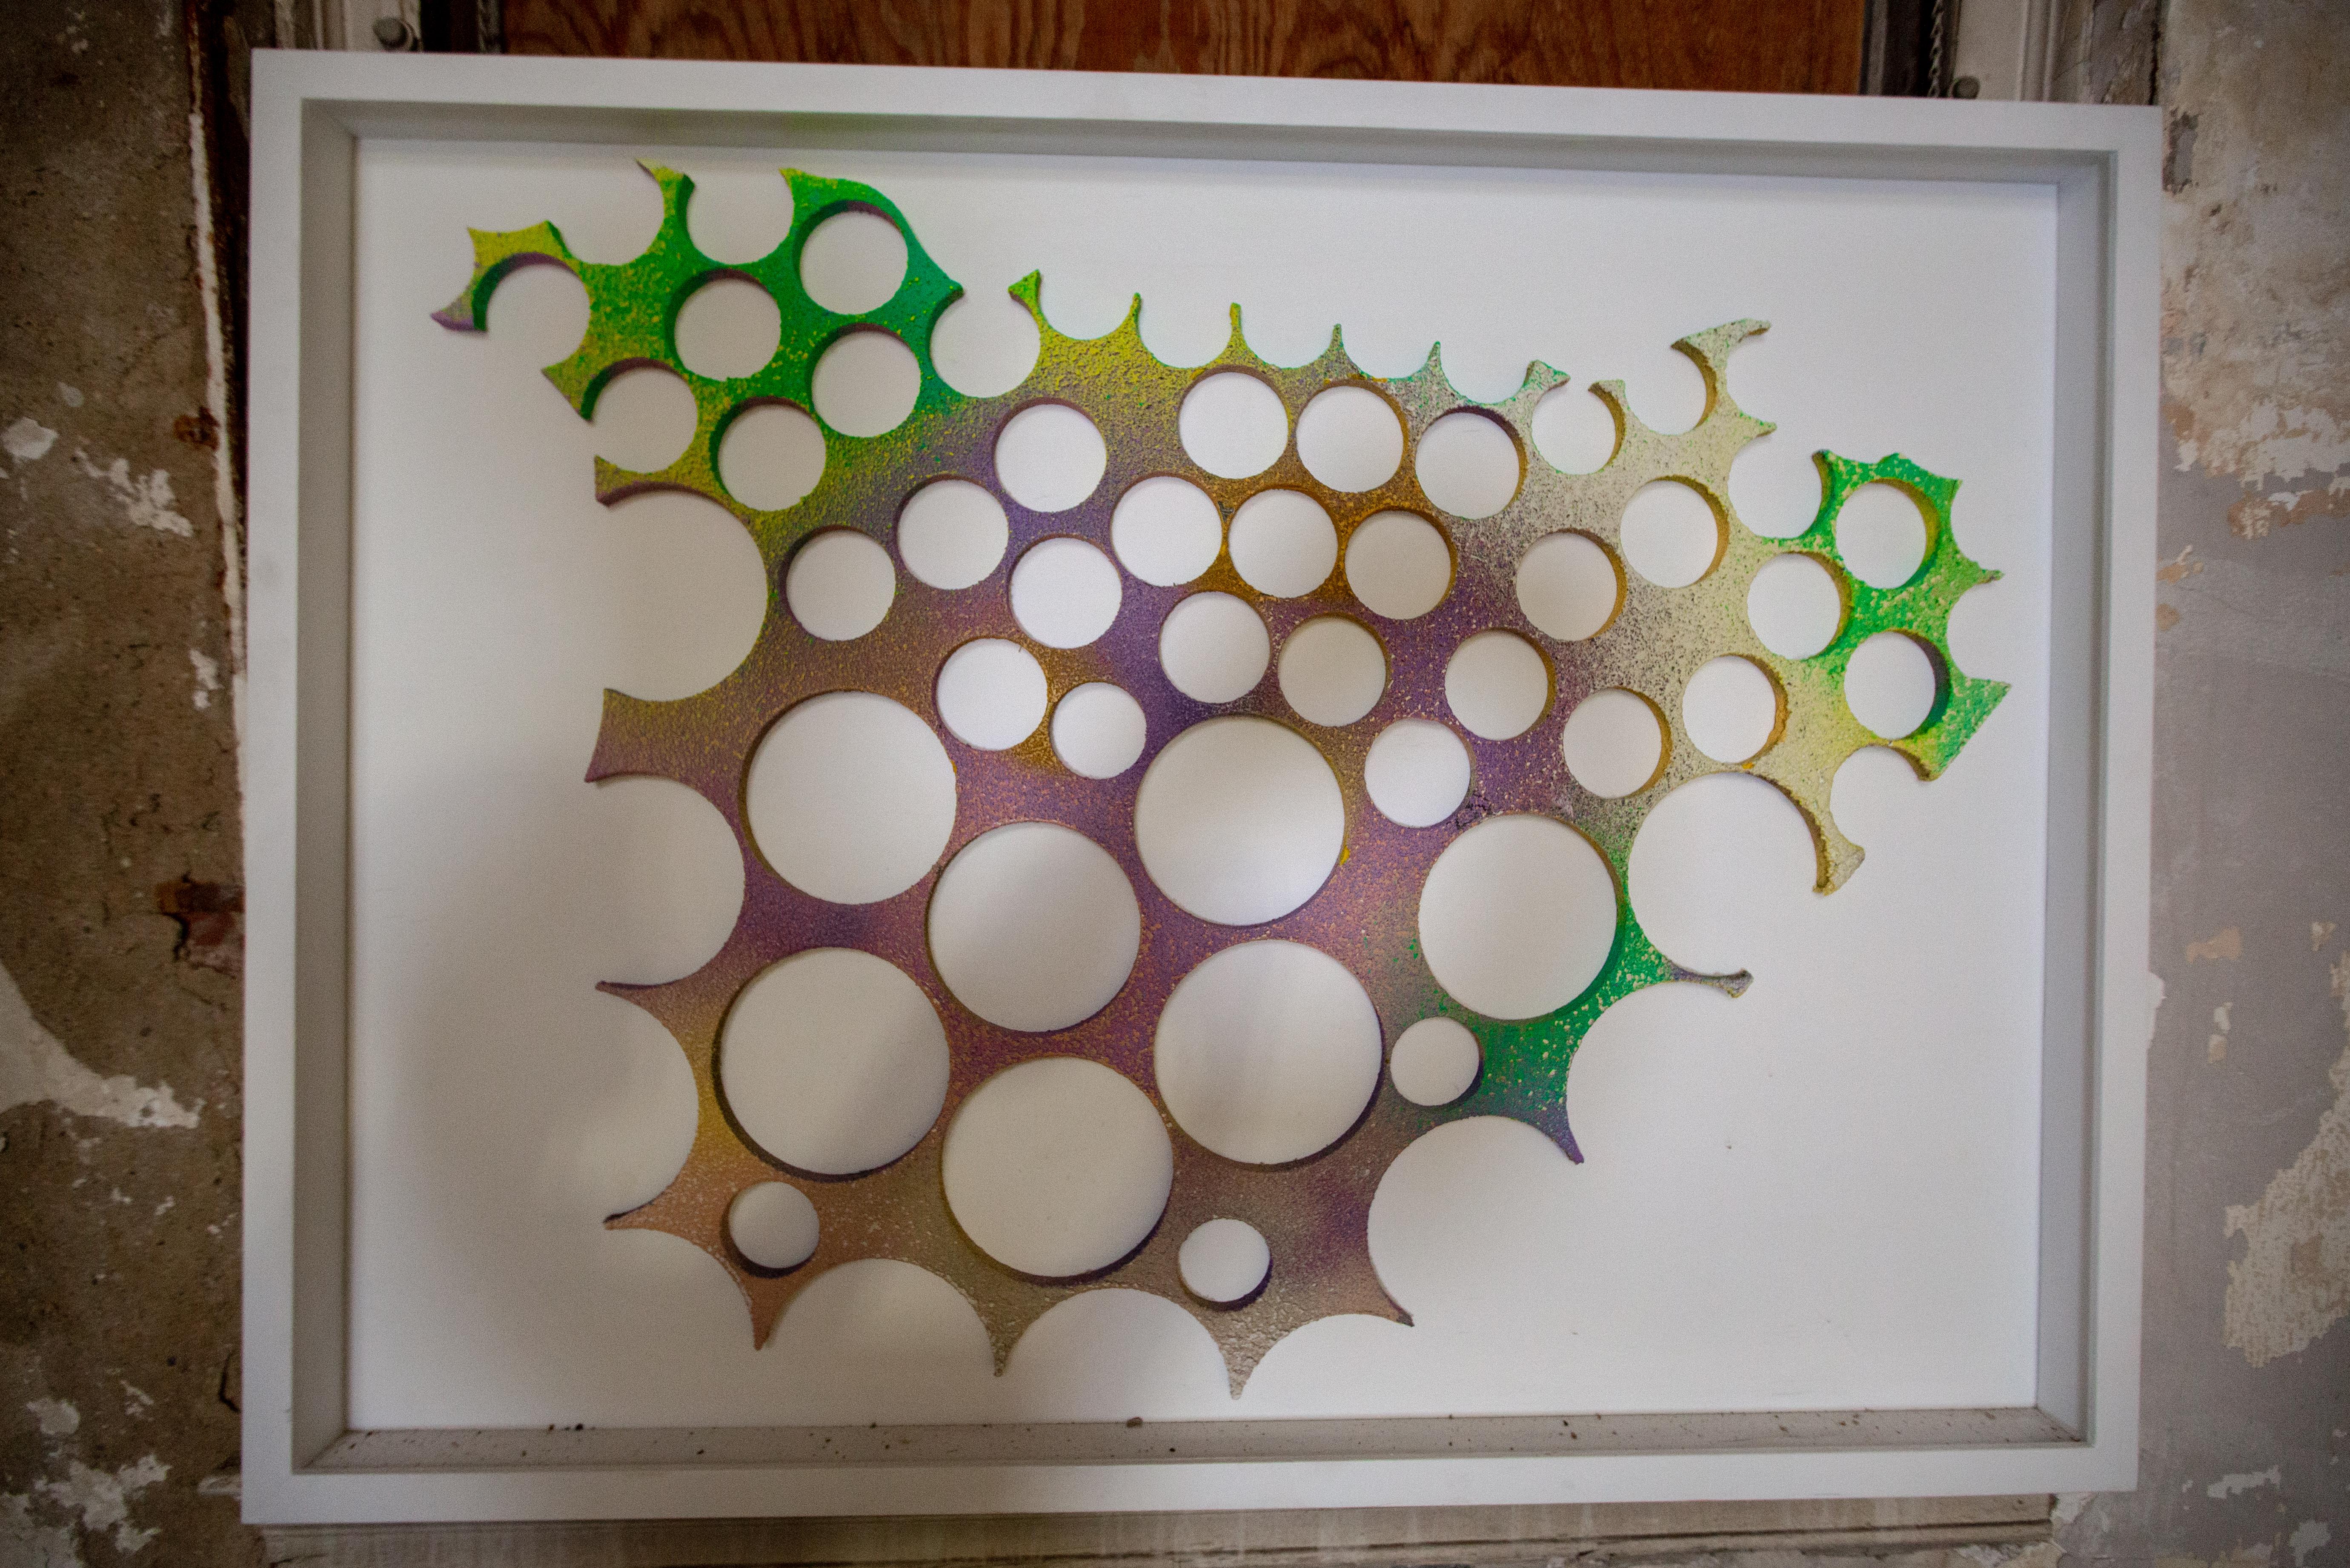 This unique piece by Joel Blenz has a white background with a white deep frame with a 3-d optical shape in the middle of it in many different colors. The piece has predominantly purple tones with green and yellow tones in the corners of the 3D